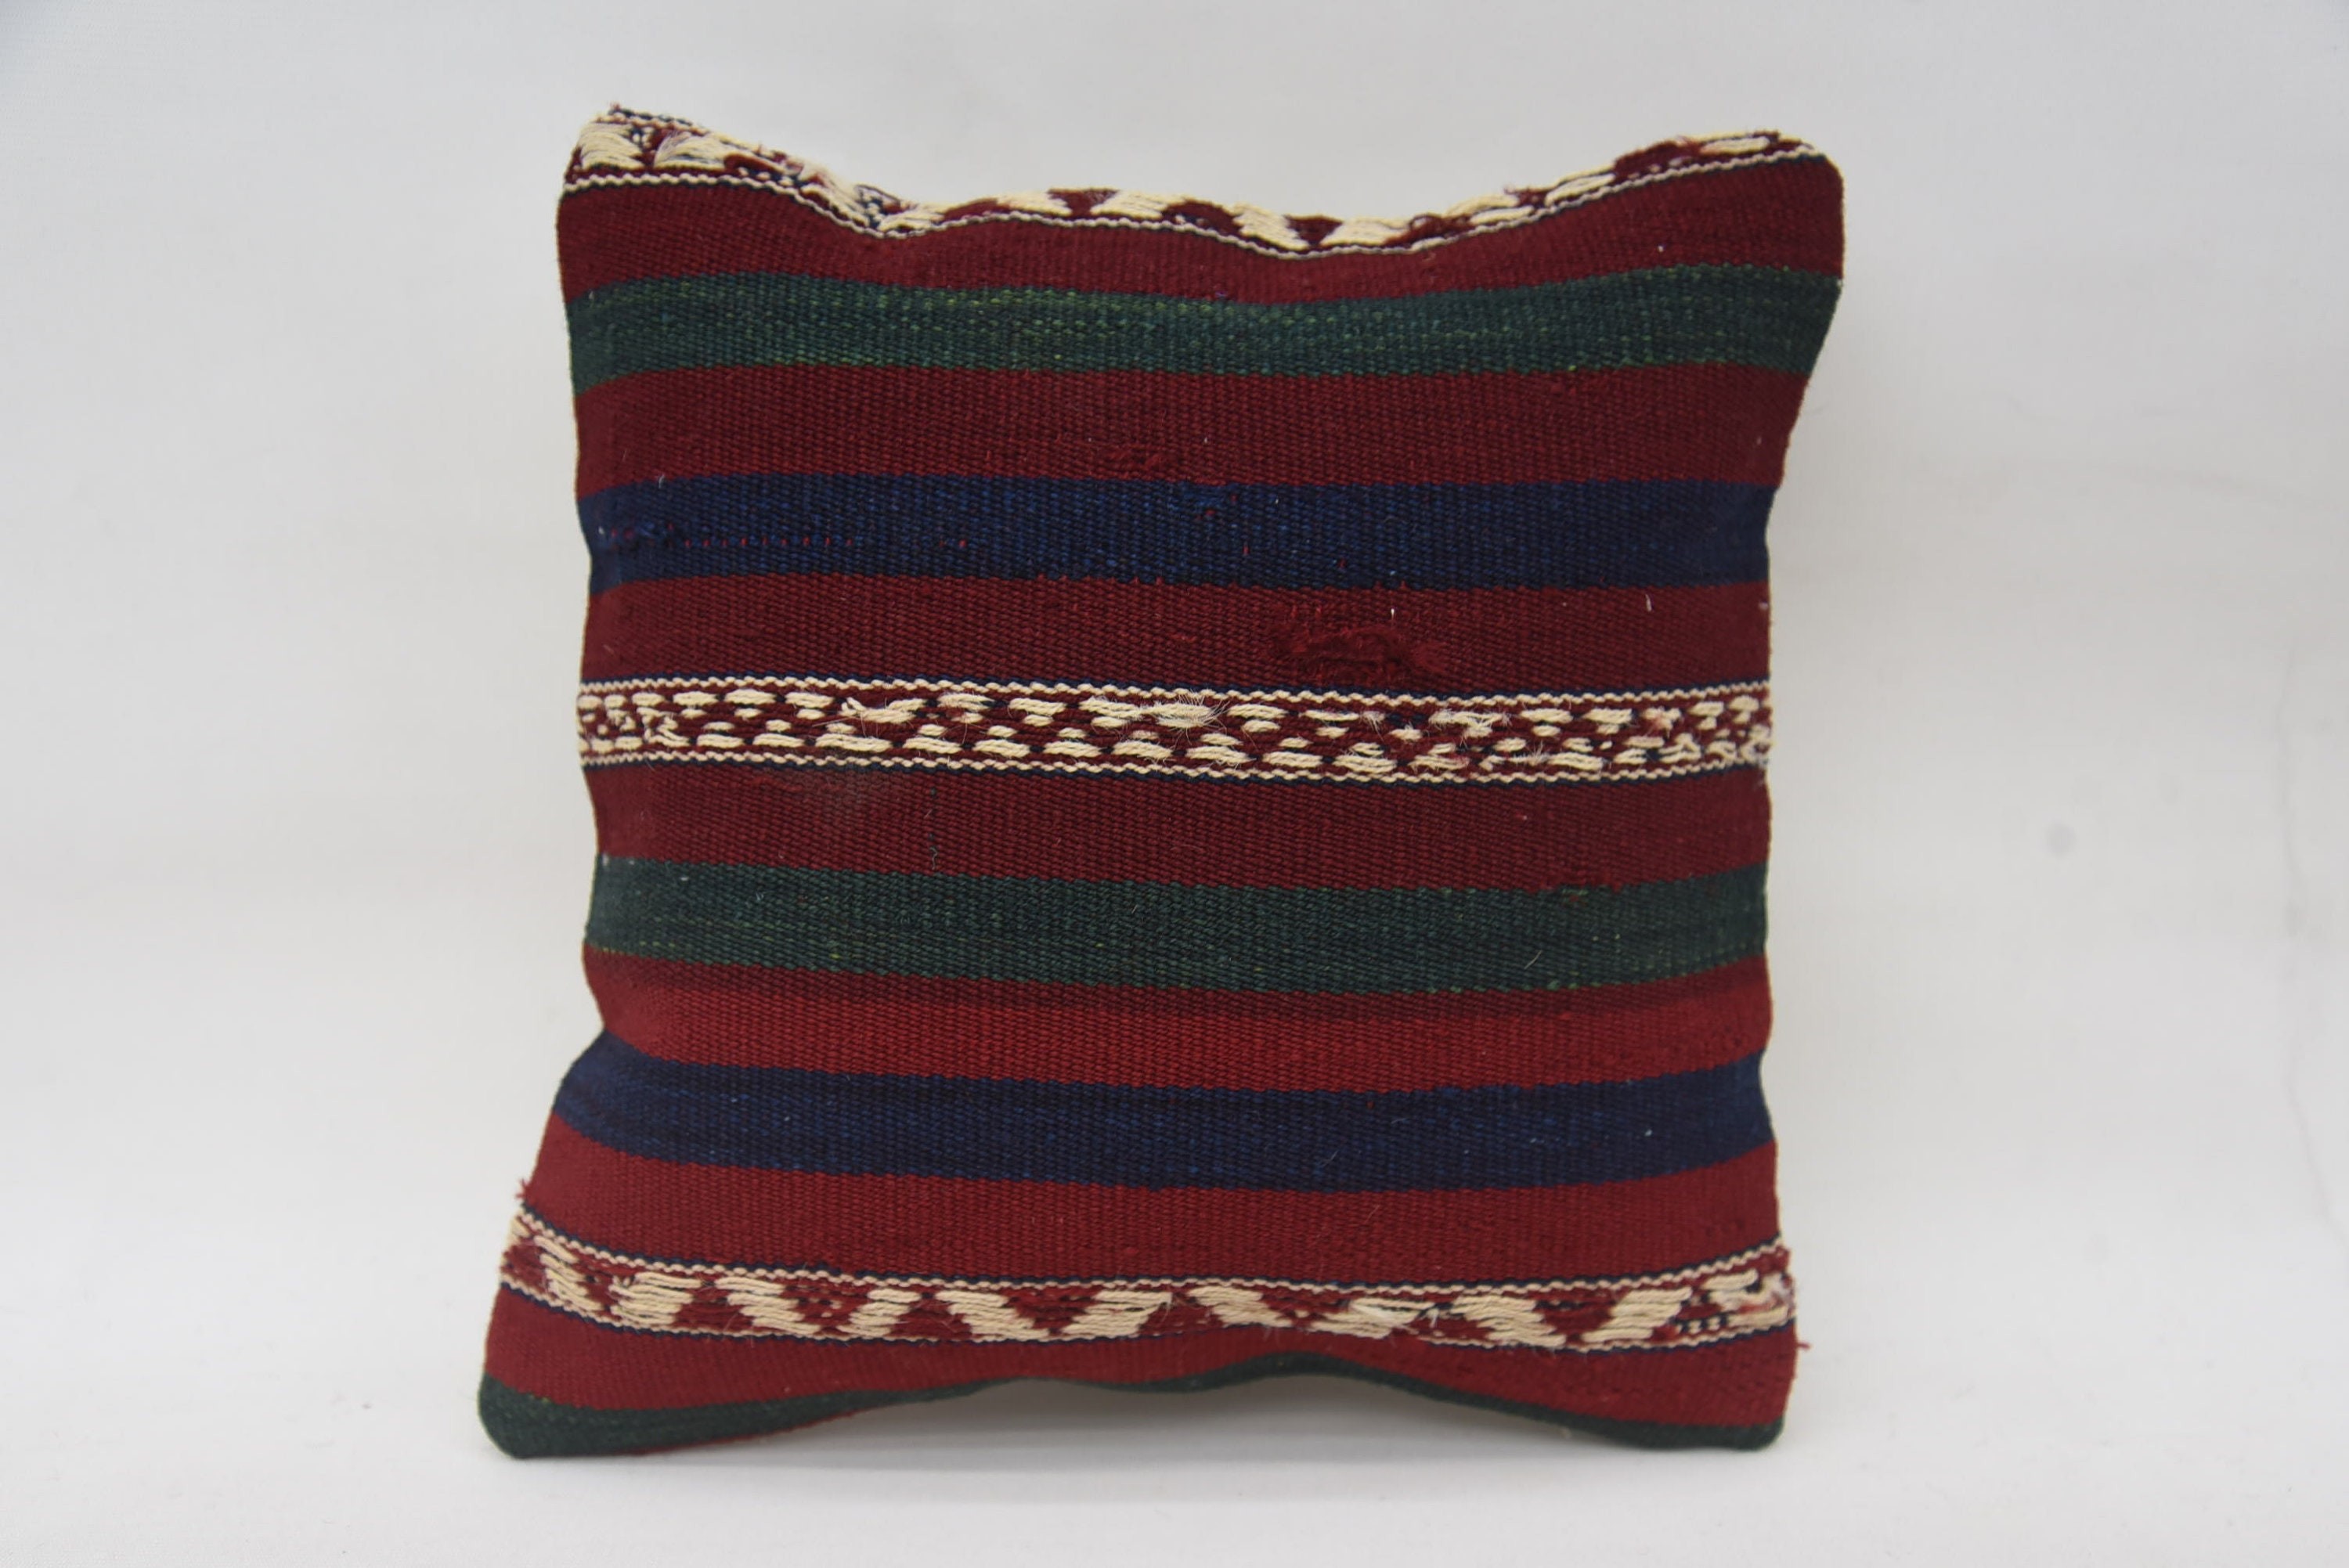 Turkish Kilim Pillow, Pillow for Couch, Turkish Pillow, 12"x12" Red Pillow, Luxury Cushion, Ethnic Throw Cushion Cover